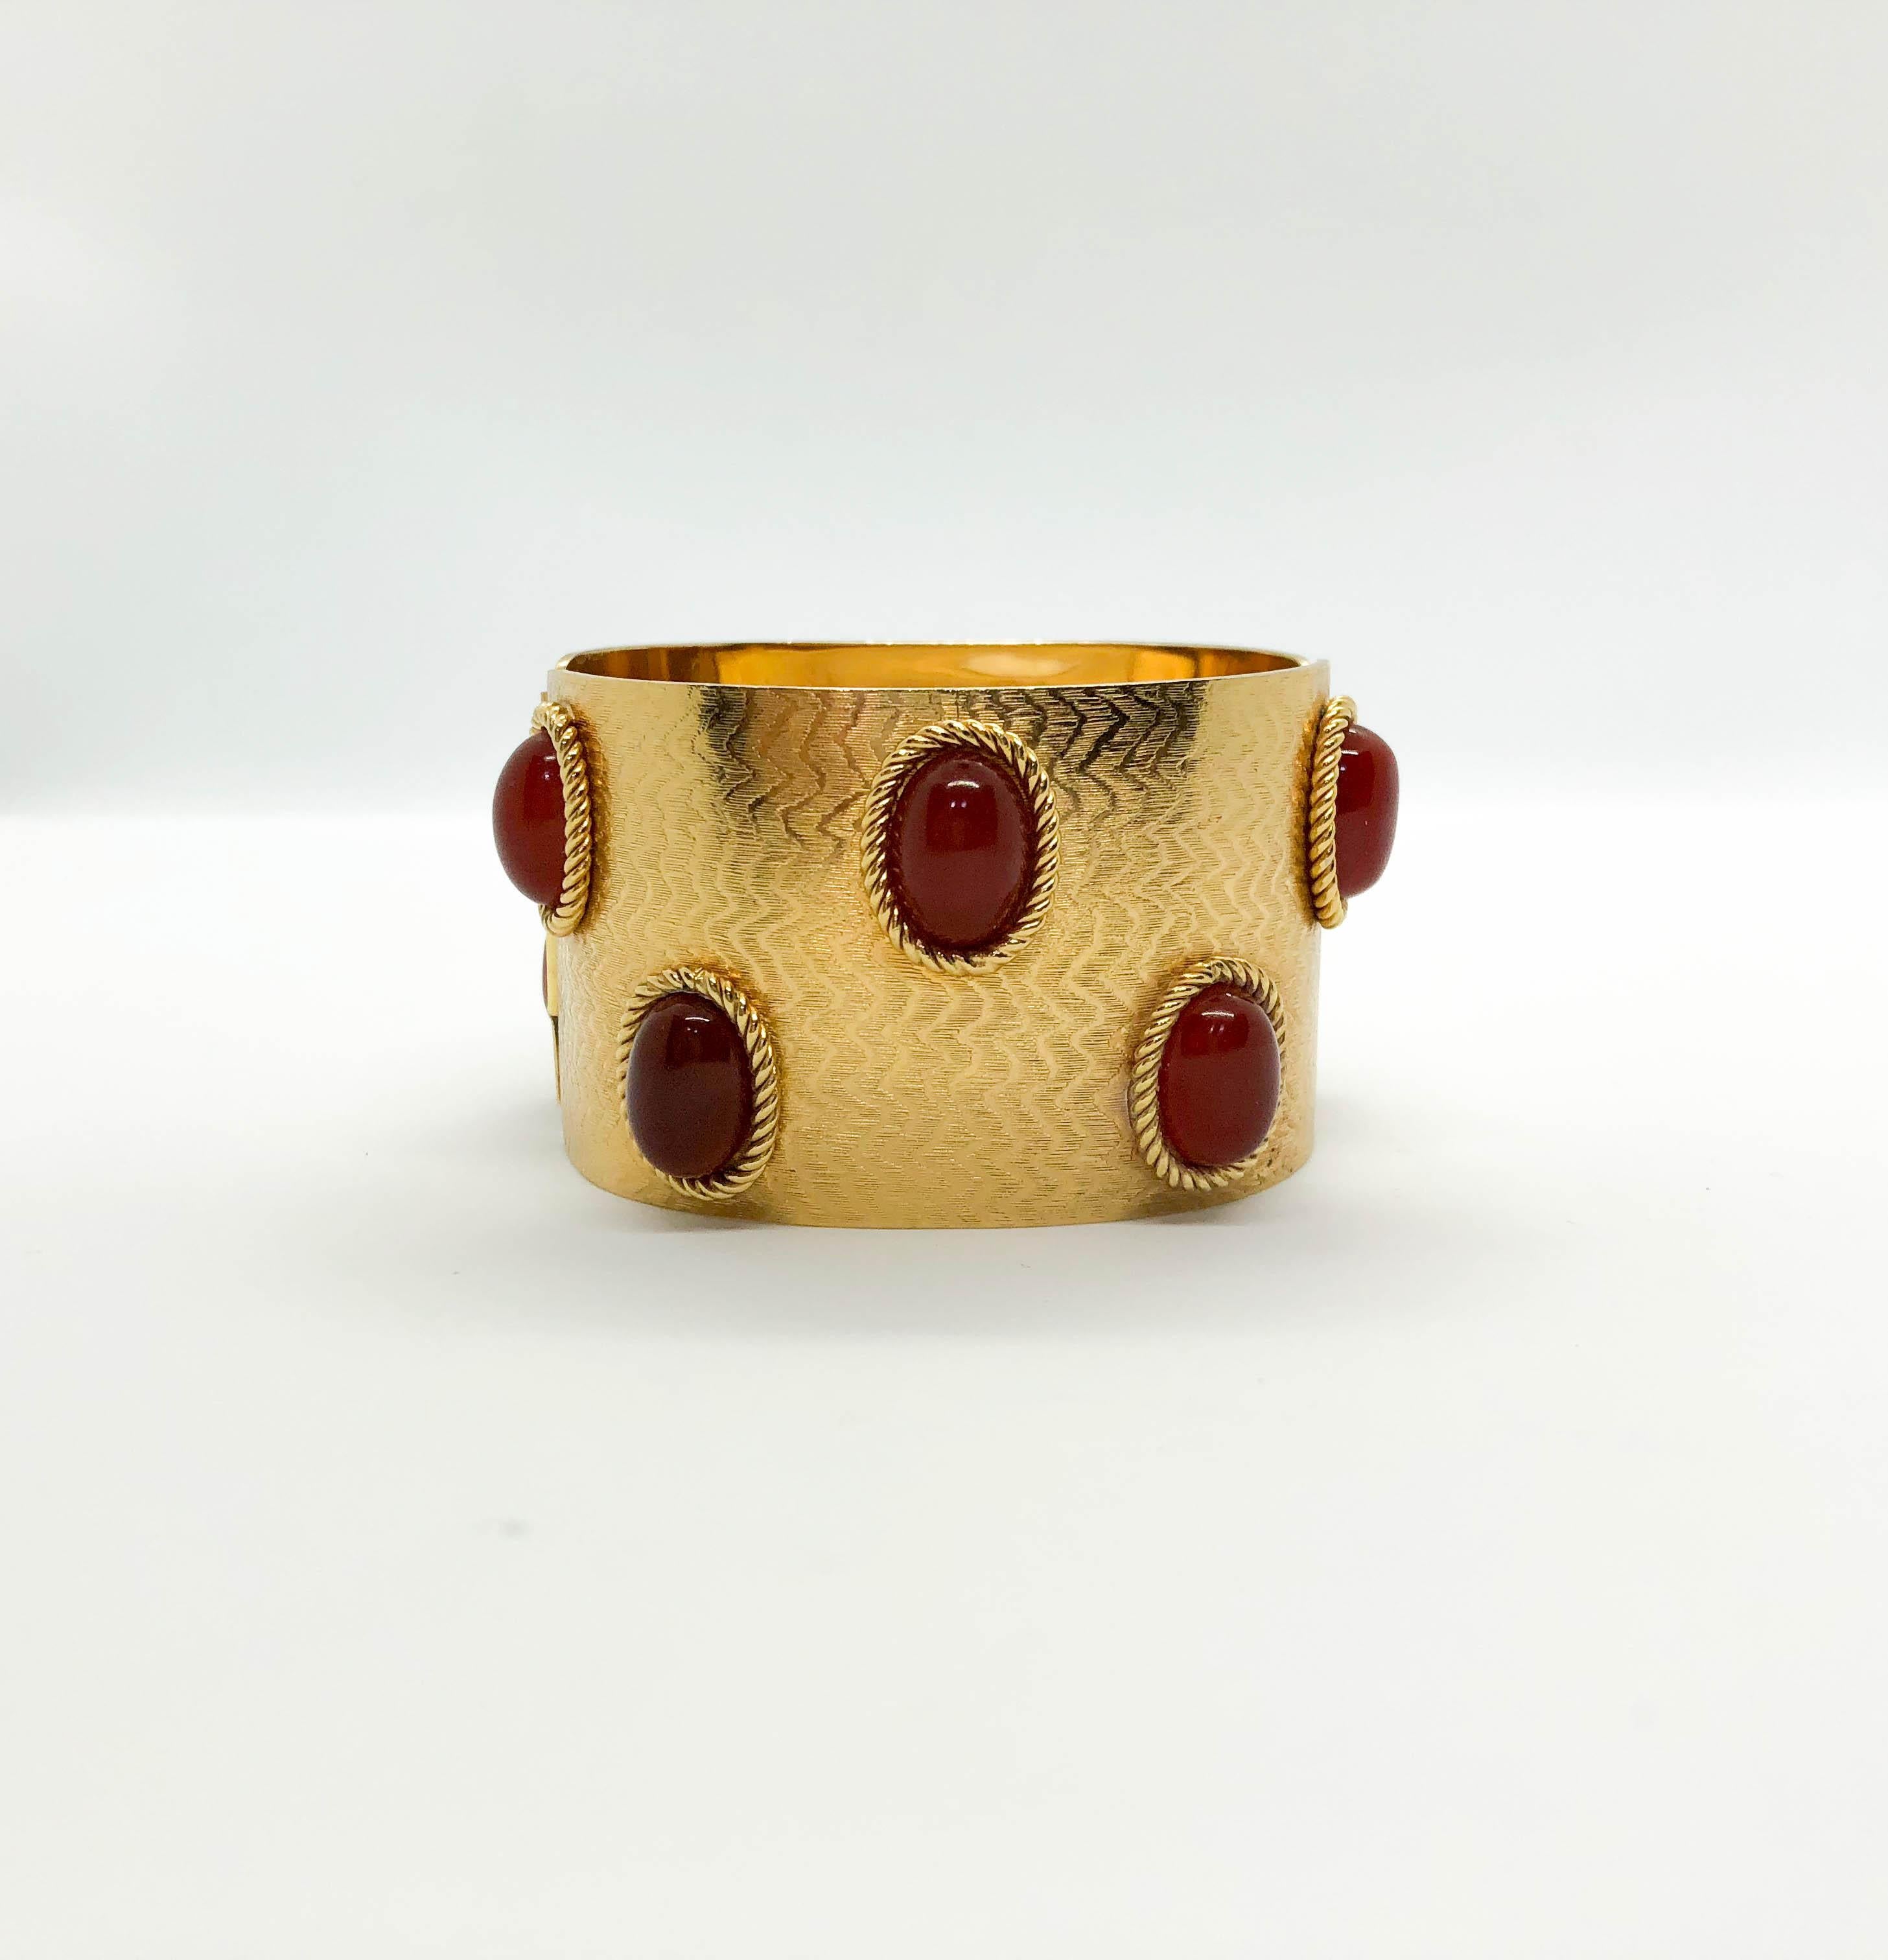 1968 Dior Gold-Plated Cuff Bracelet Embellished with Faux Amber Beads For Sale 5